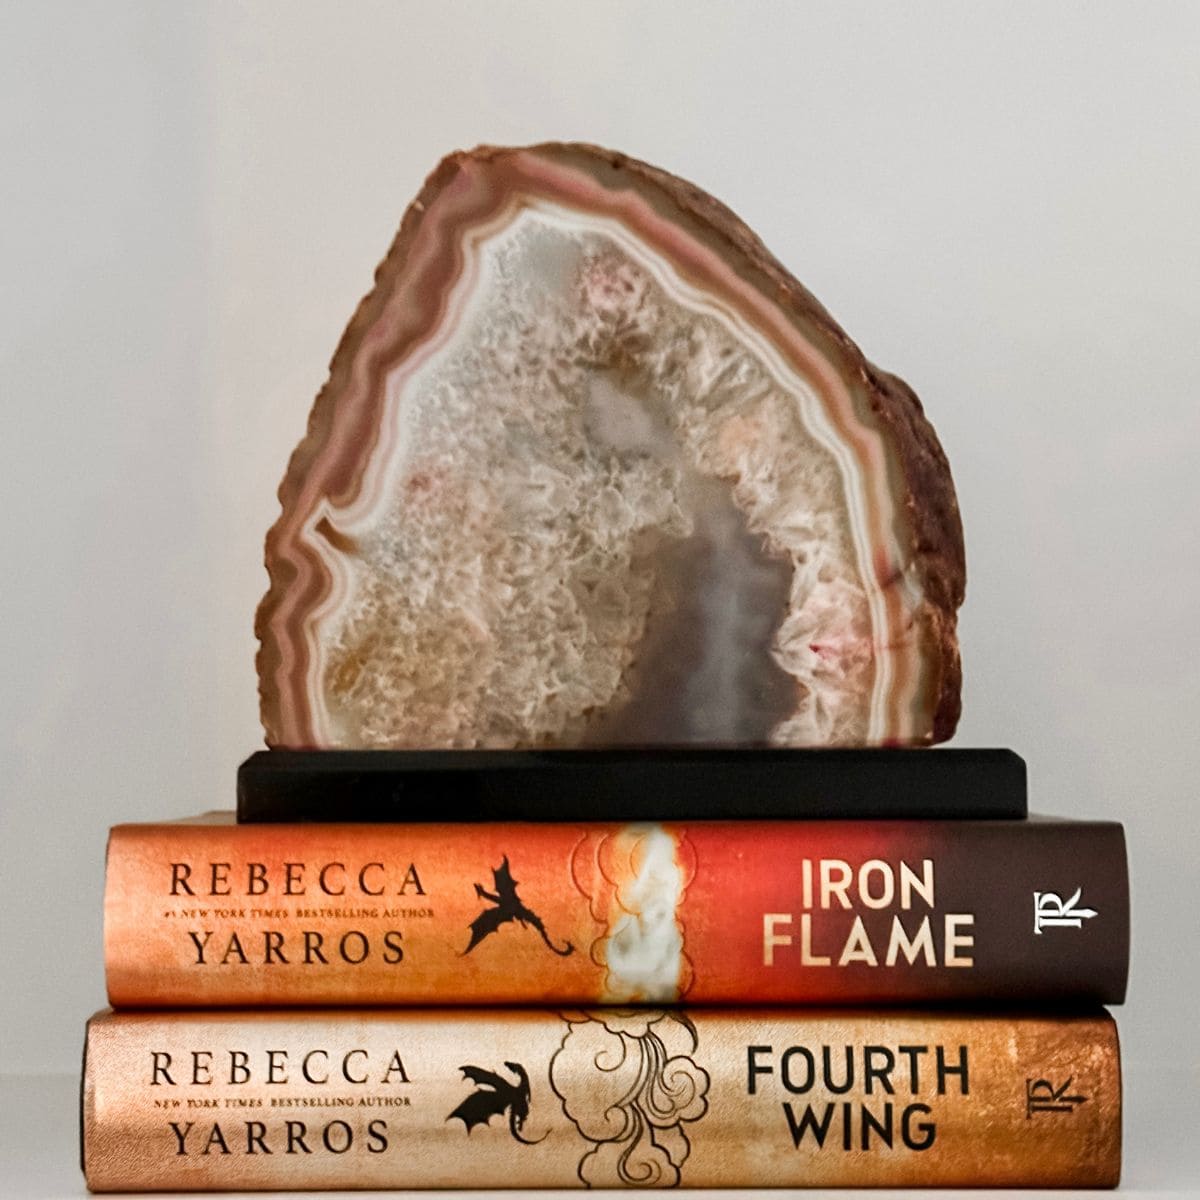 fourth wing and iron flame by rebecca yarros with an agate stone.